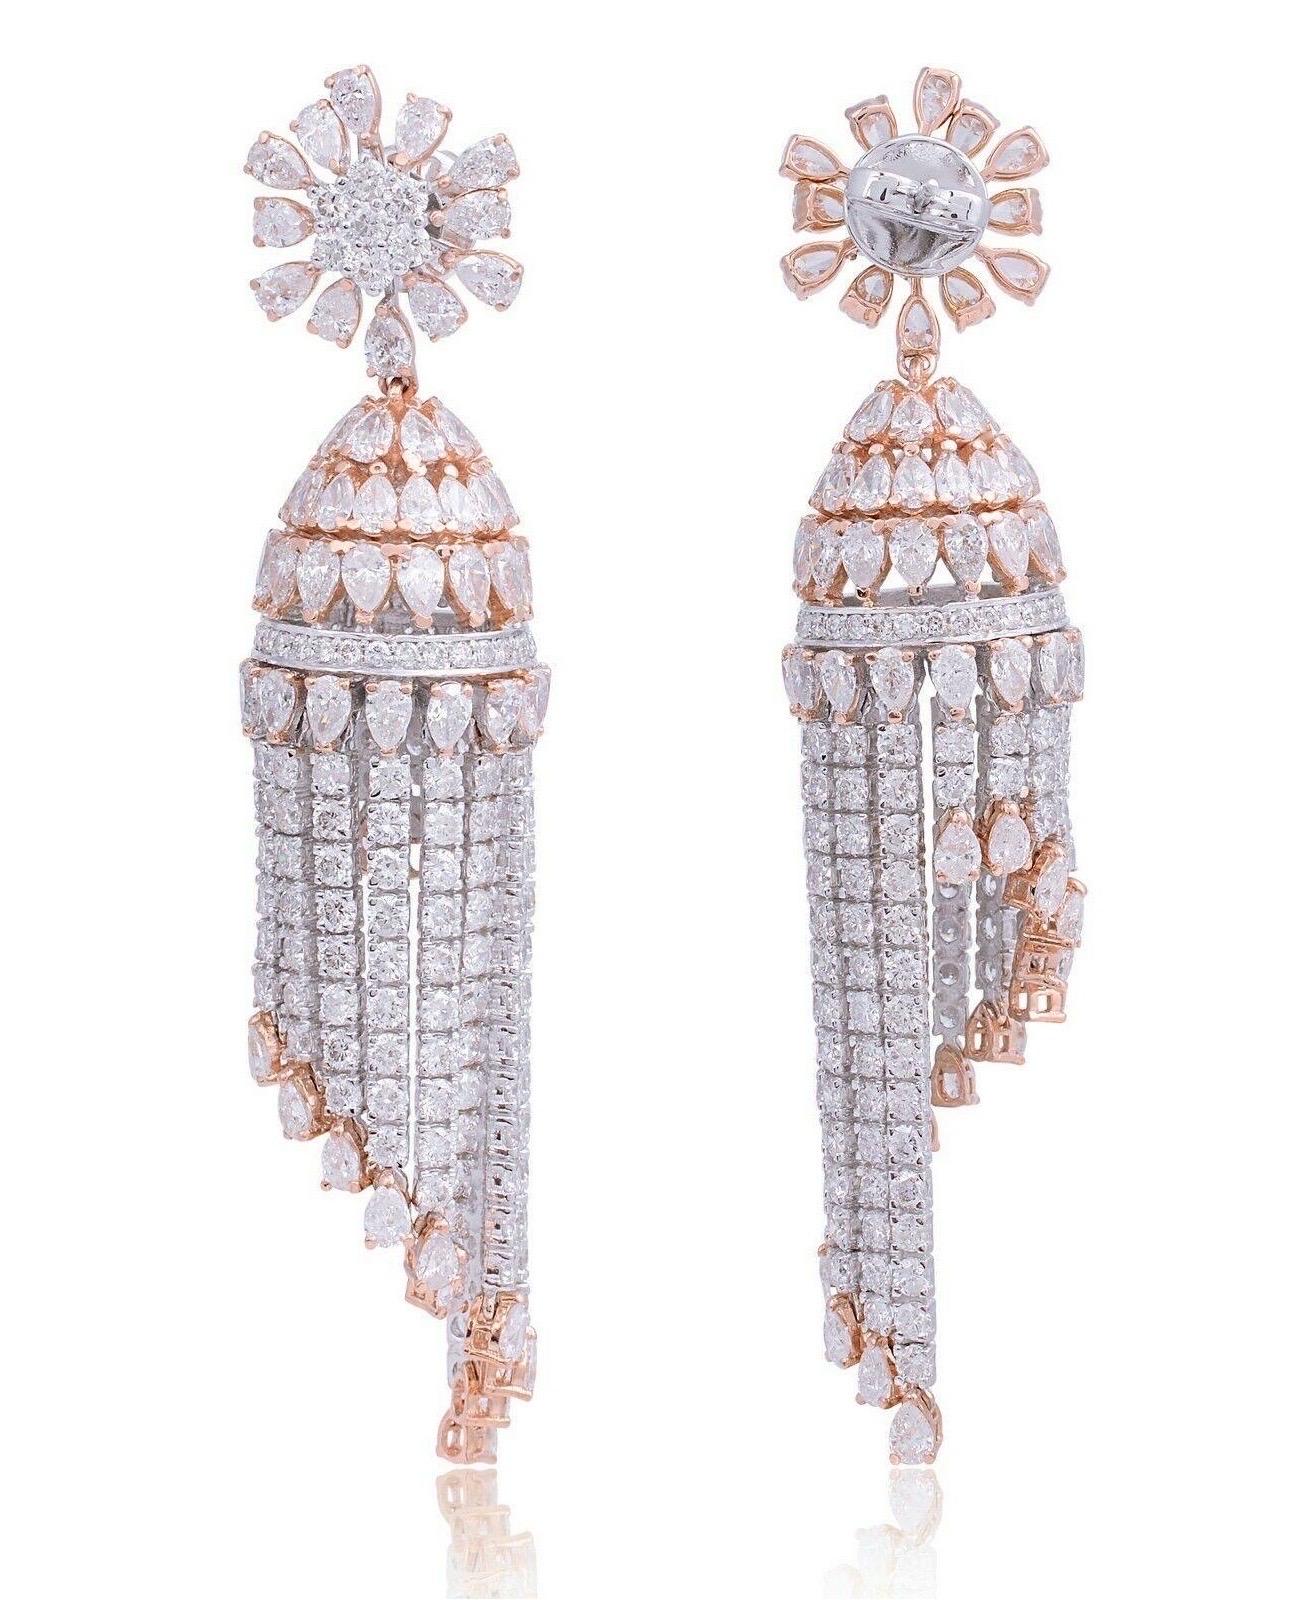 These exquisite earrings are handcrafted in 14-karat gold and set in 24.20 carats of sparkling diamonds.

FOLLOW MEGHNA JEWELS storefront to view the latest collection & exclusive pieces. Meghna Jewels is proudly rated as a Top Seller on 1stdibs